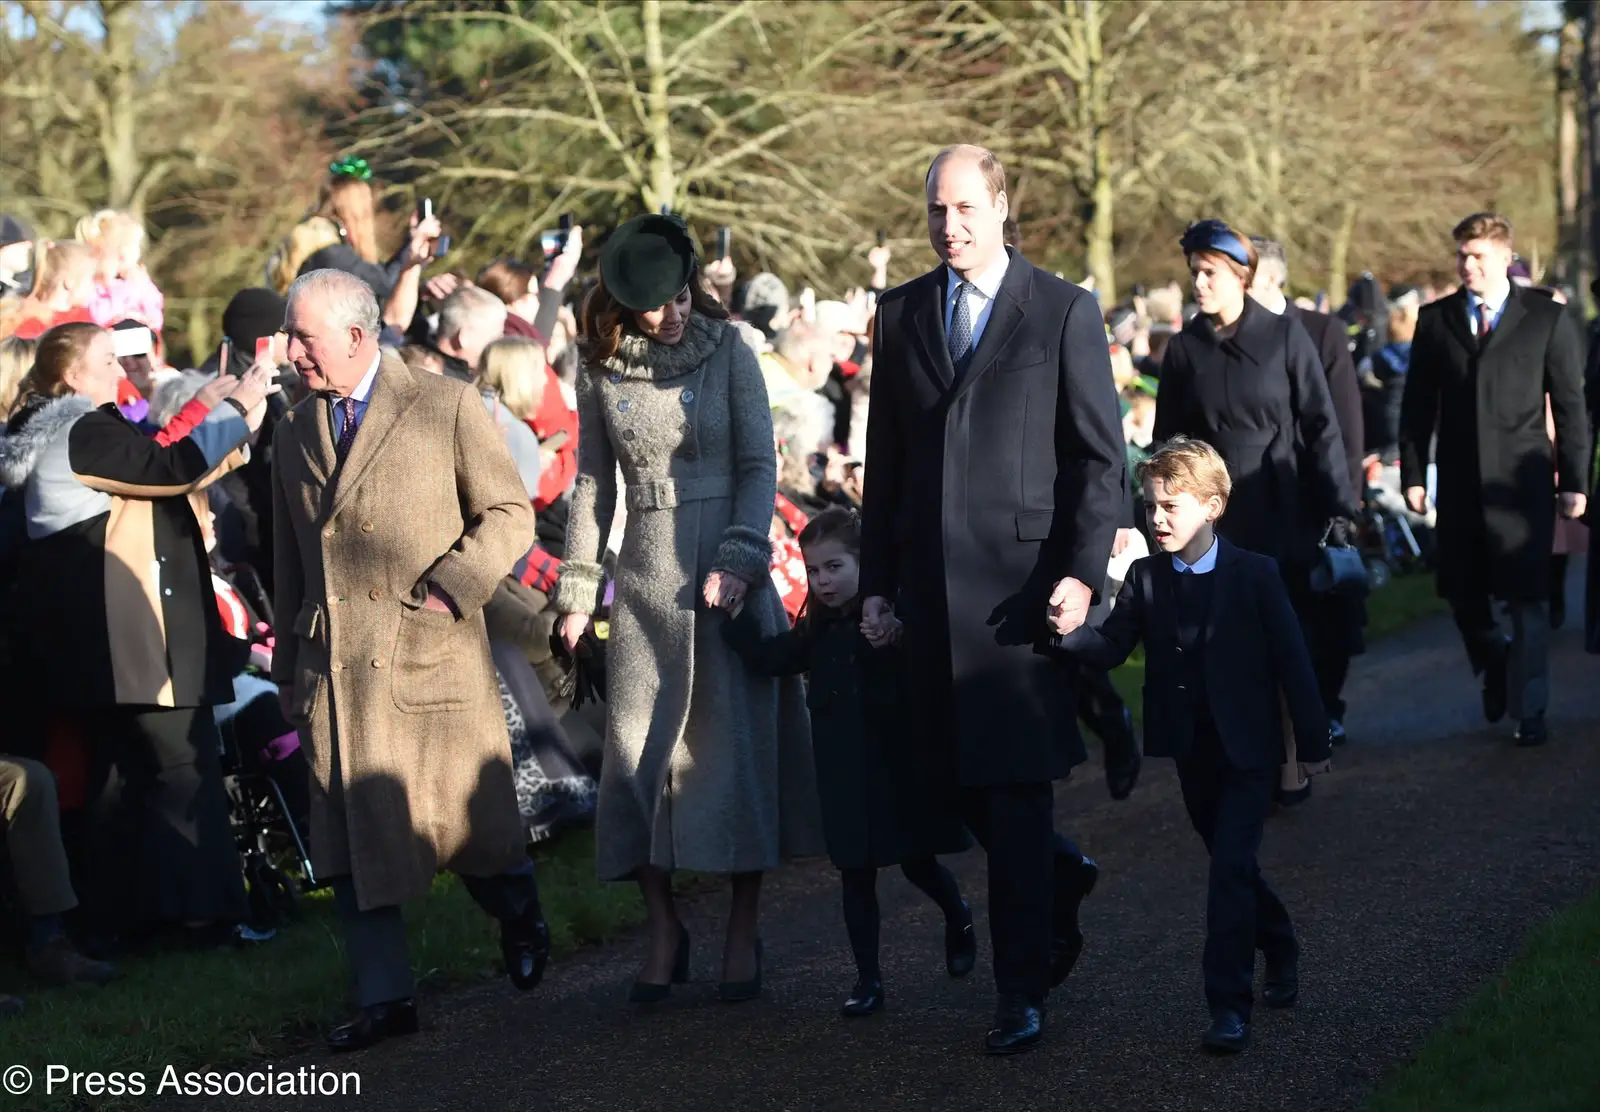 The Duke and Duchess of Cambridge joined Queen and Family for Christmas Church Service